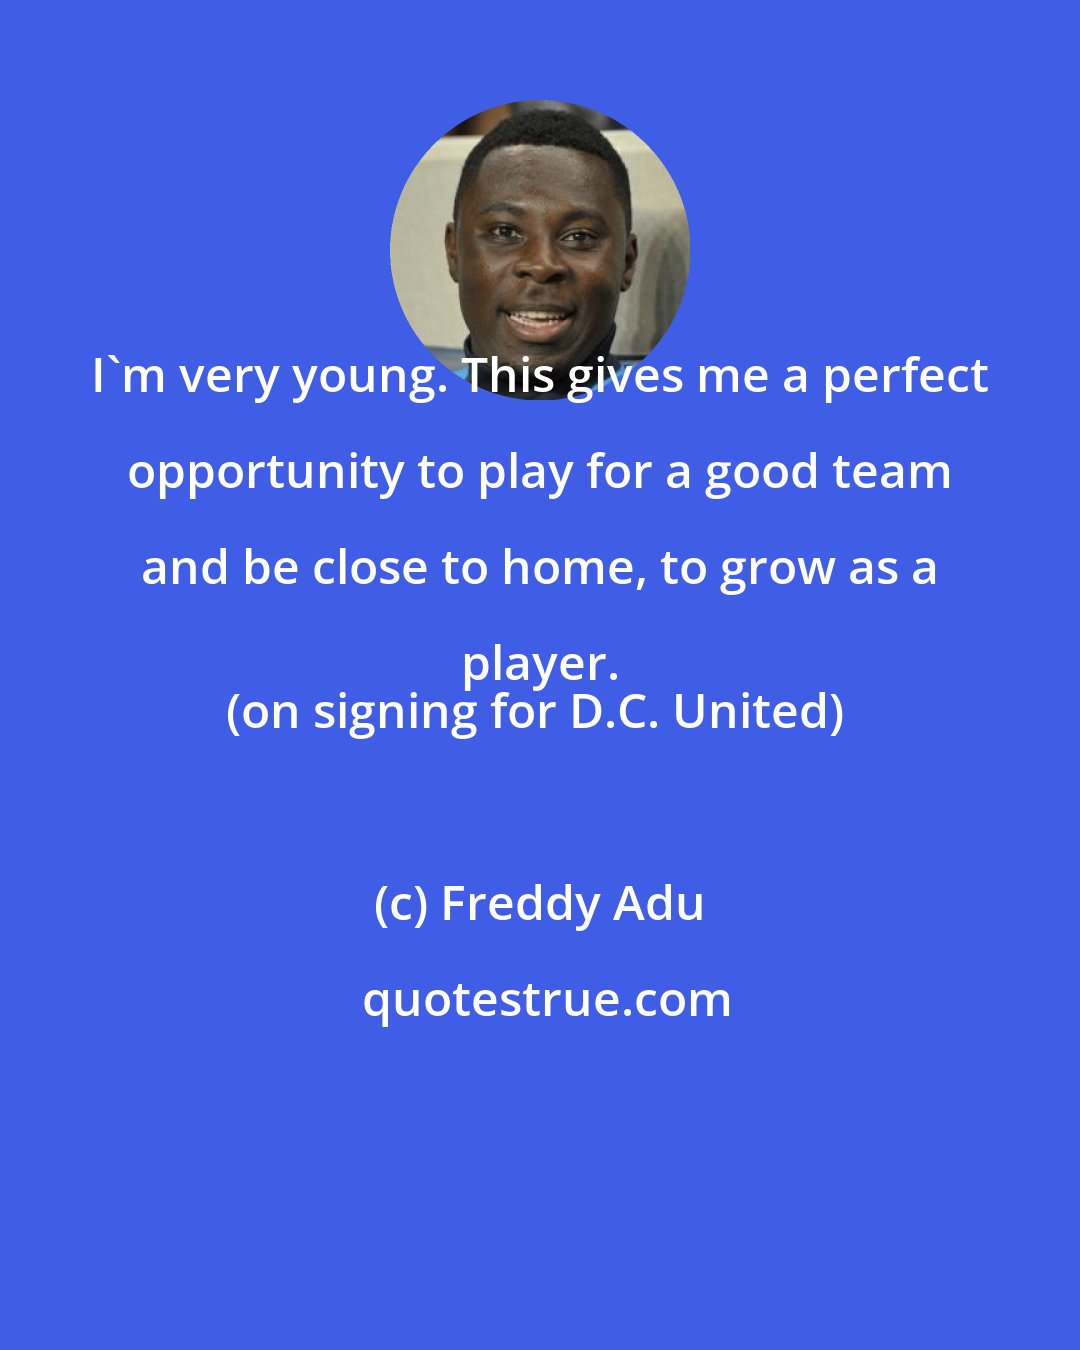 Freddy Adu: I'm very young. This gives me a perfect opportunity to play for a good team and be close to home, to grow as a player. 
(on signing for D.C. United)